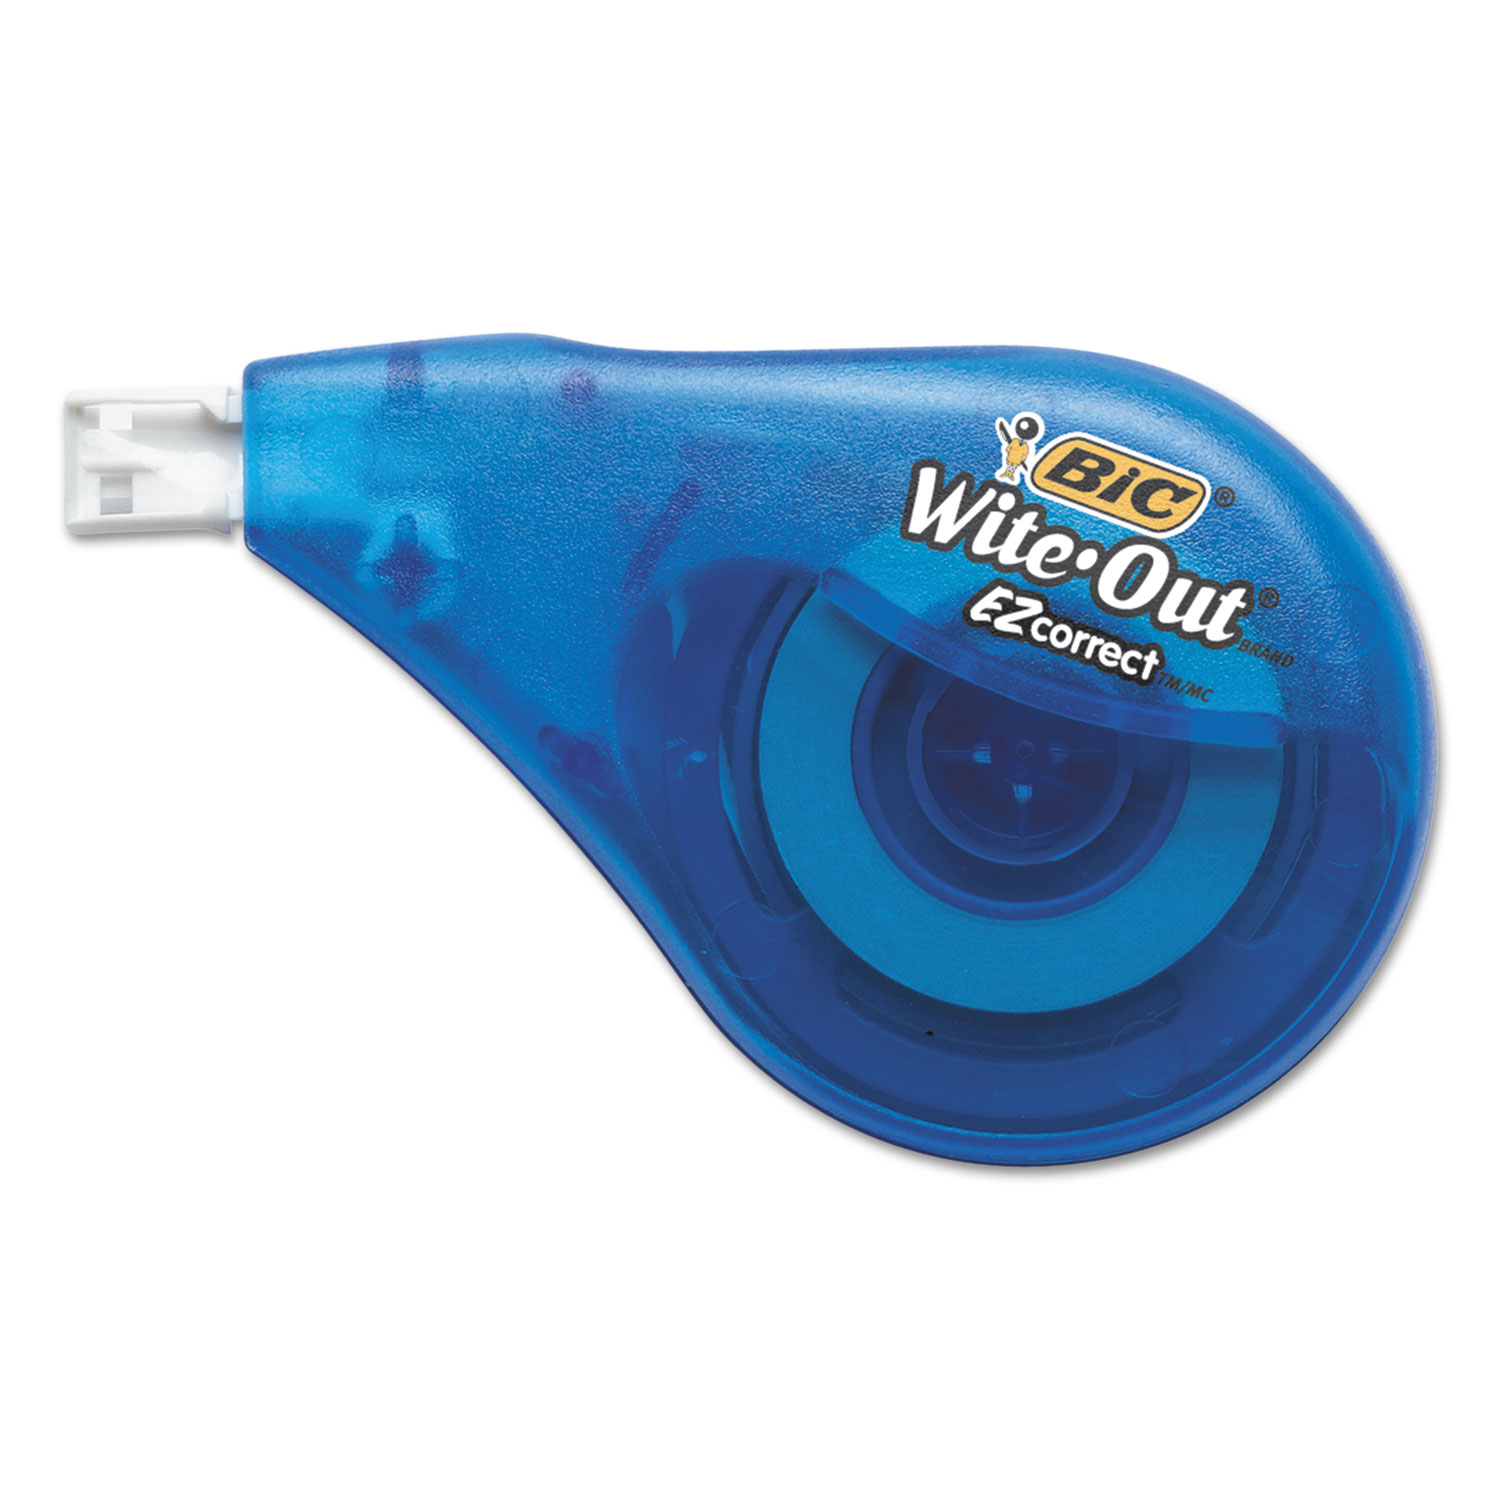 Wite-Out EZ Correct Correction Tape, Non-Refillable, Randomly Assorted  Applicator Colors, 0.17 x 400, 4/